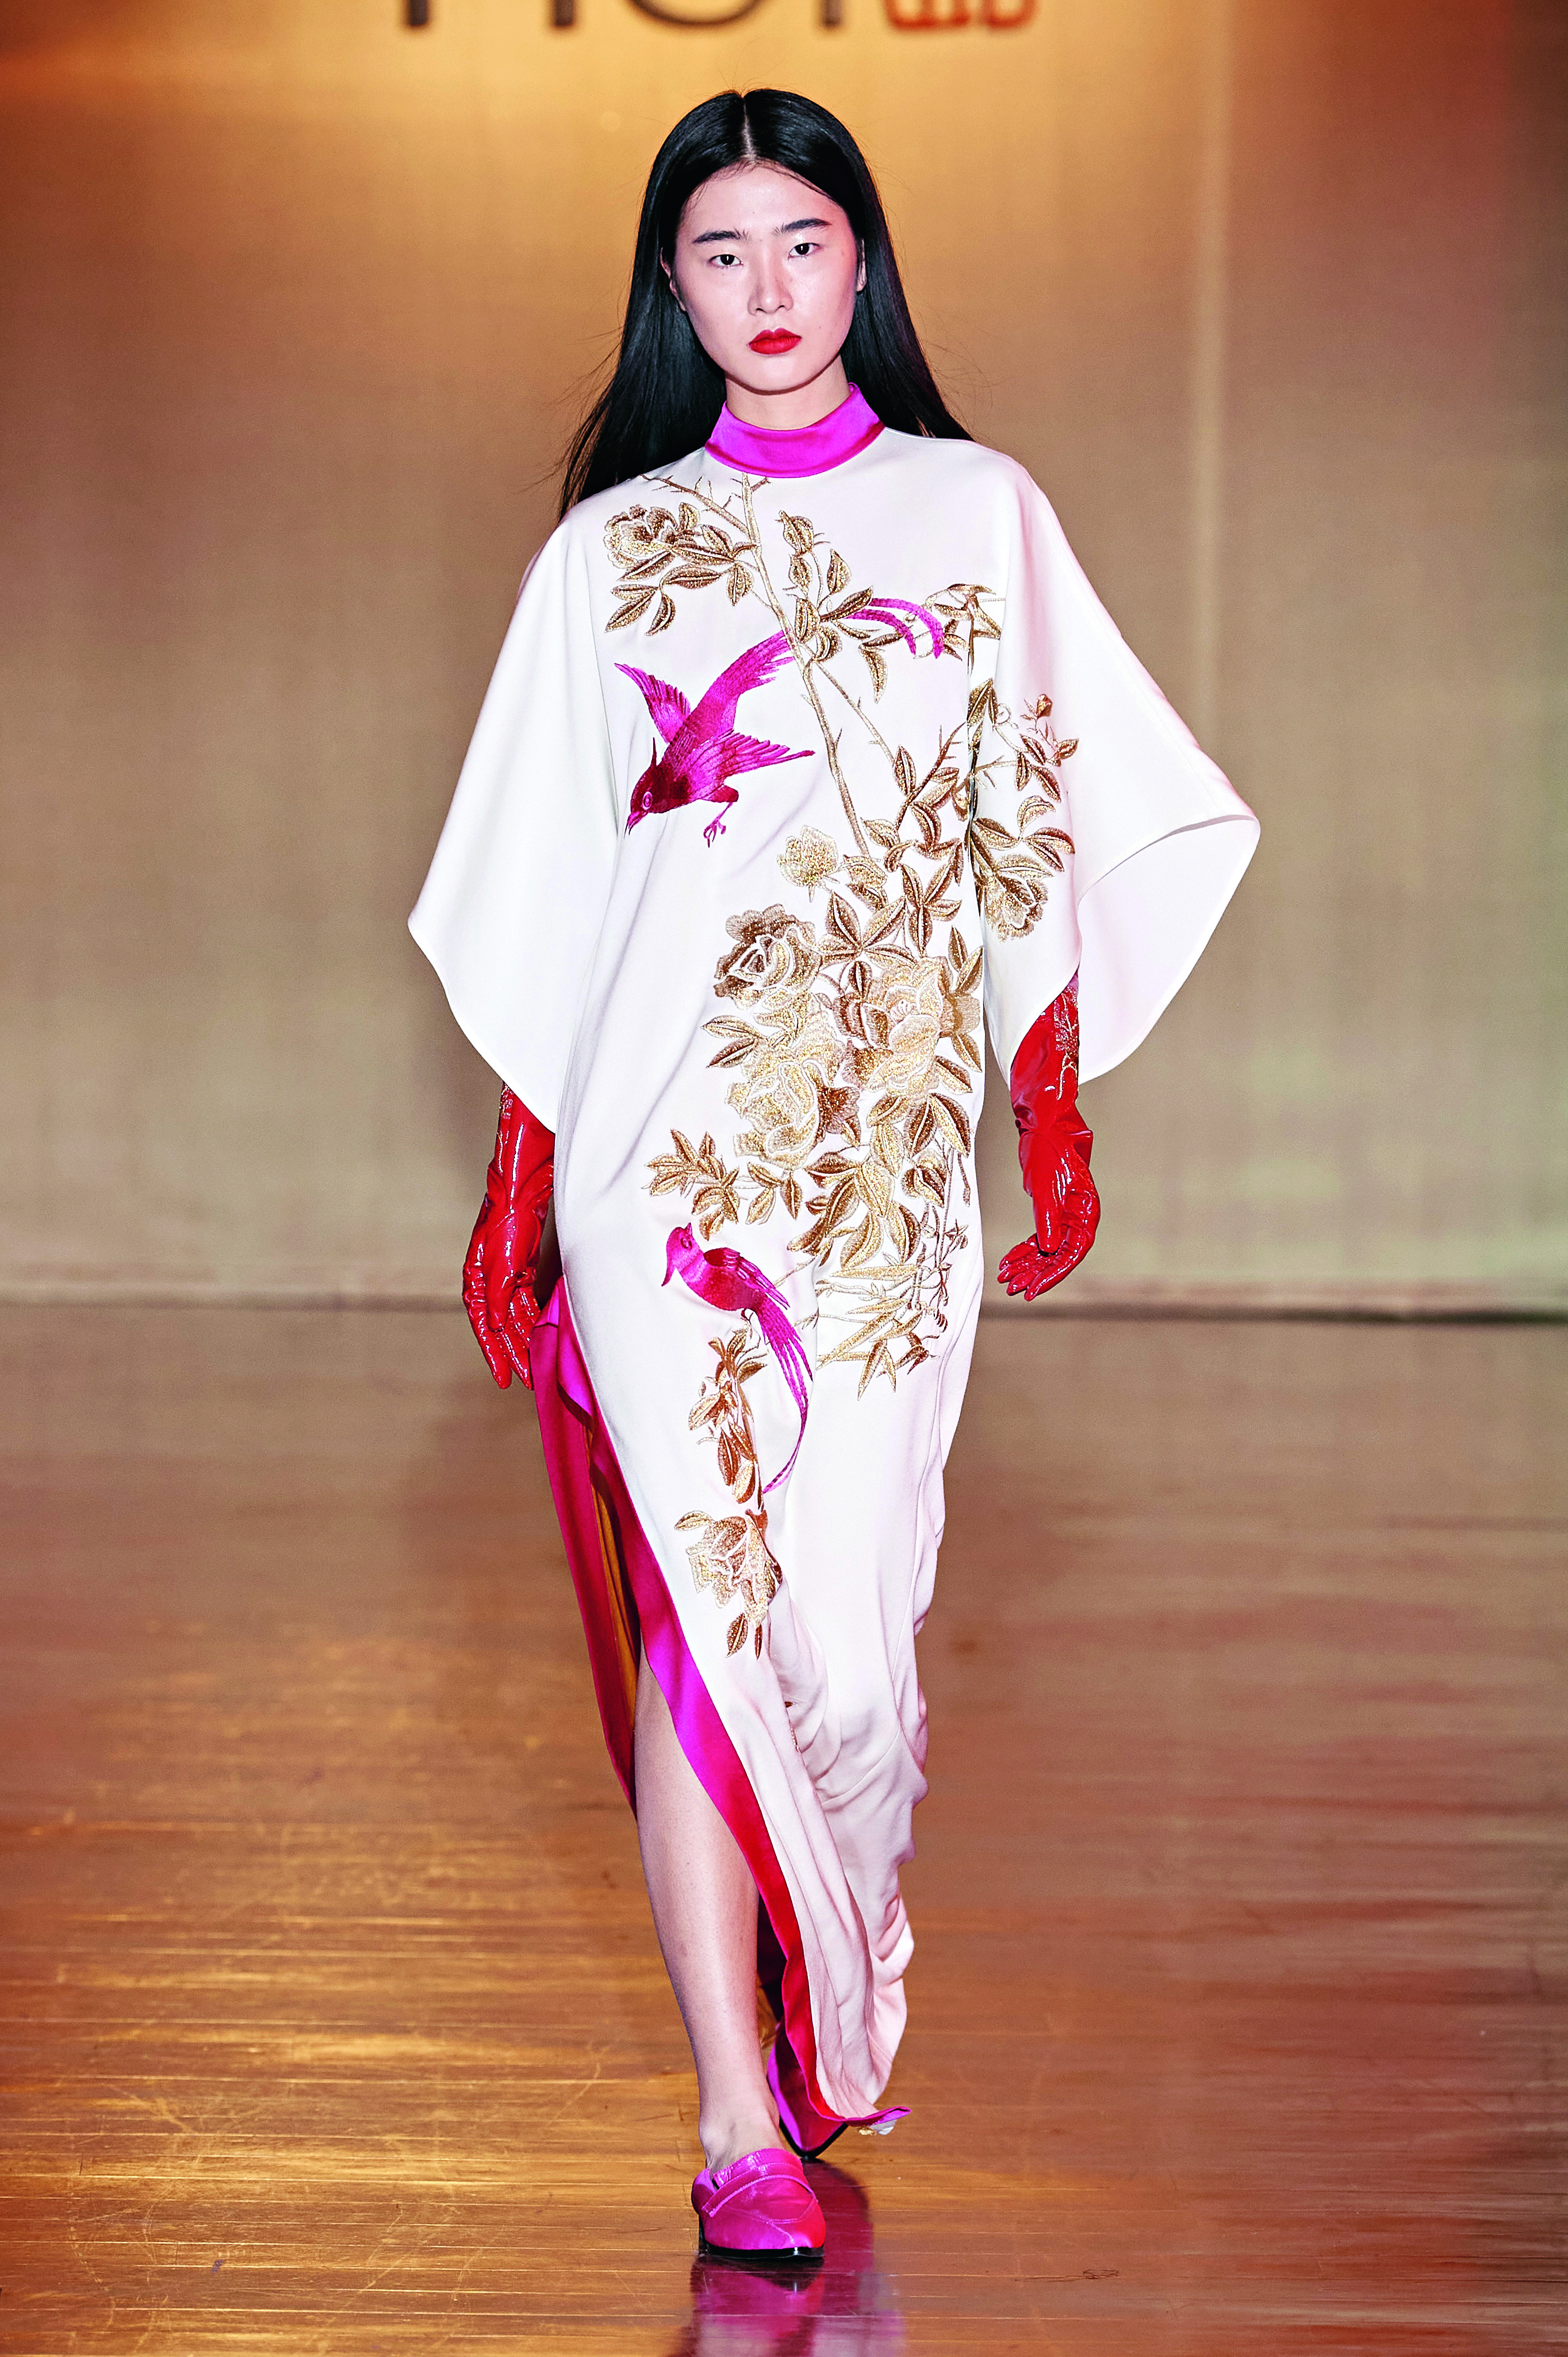 Amazing International Fashions Integrated with Traditional Chinese Cultural Elements